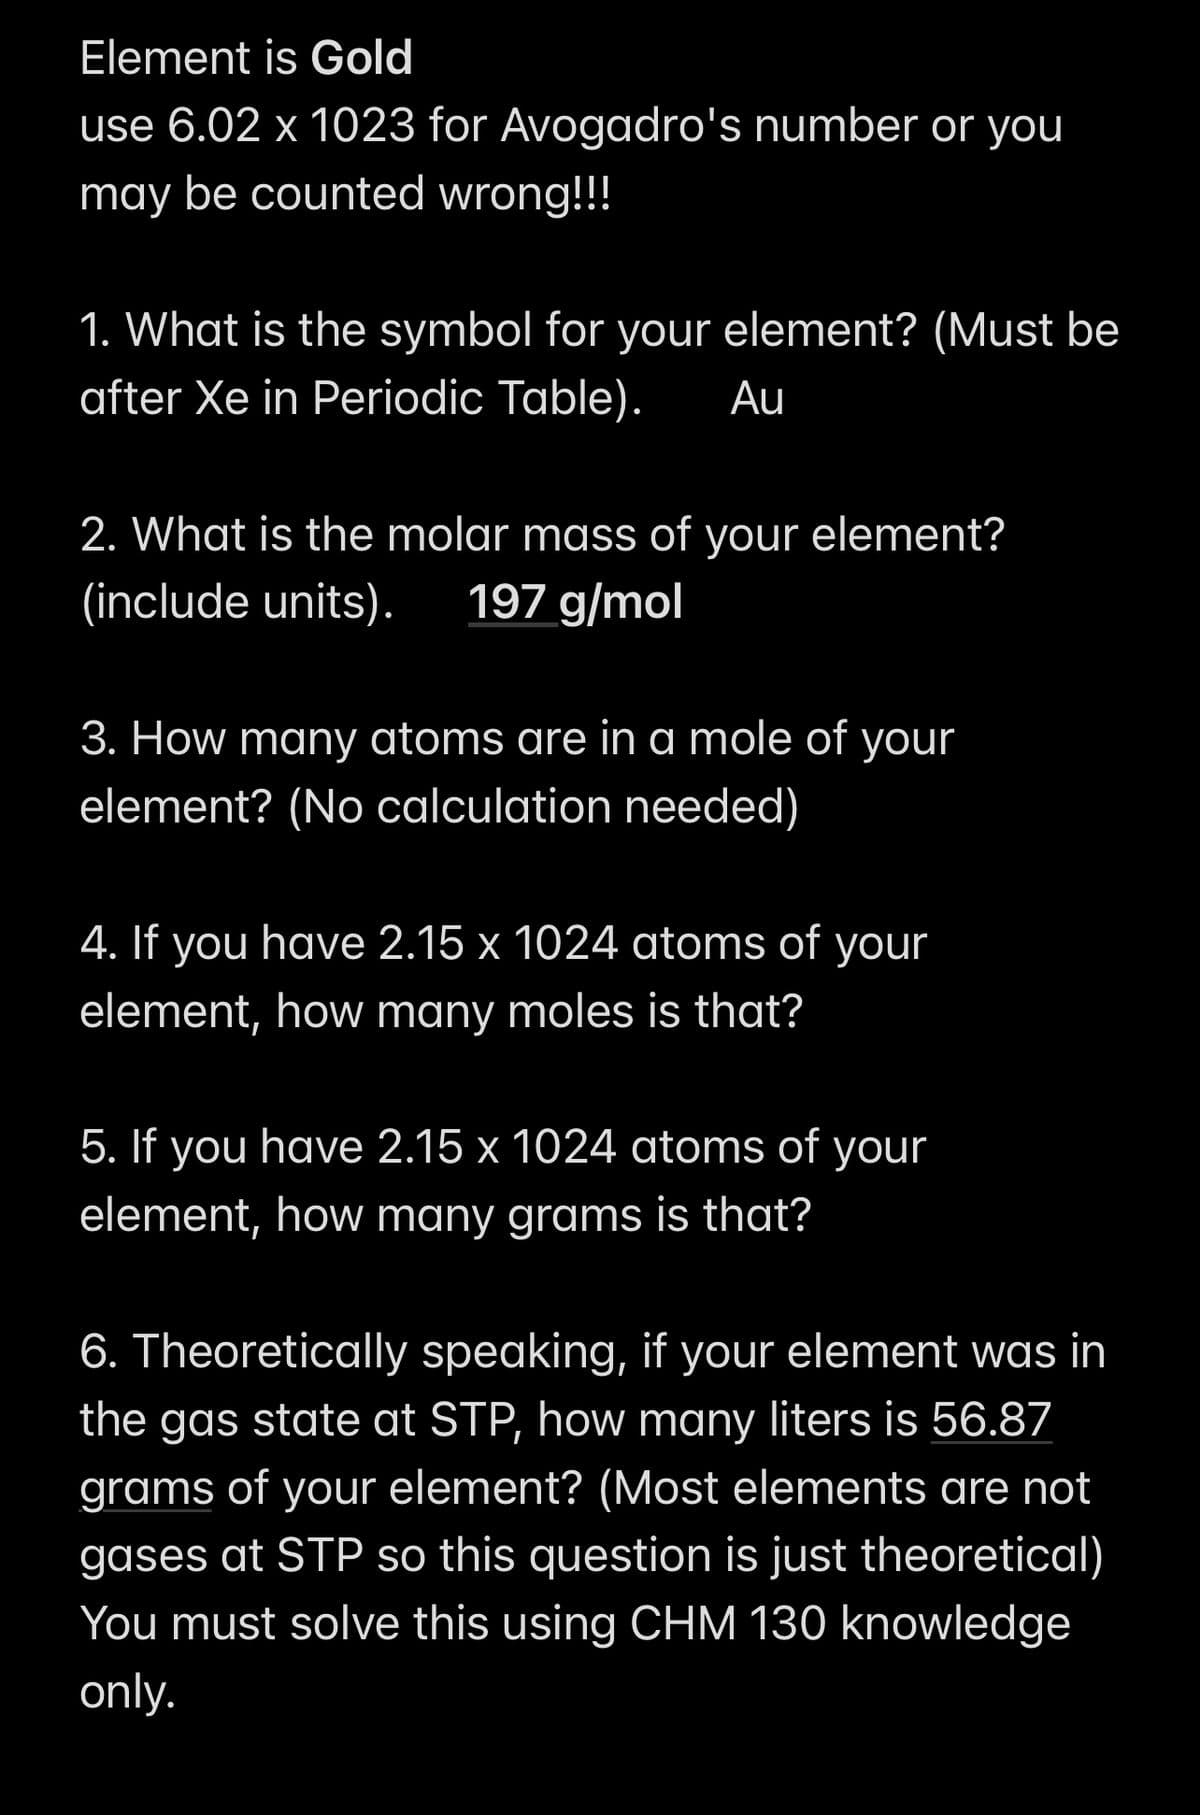 Element is Gold
use 6.02 x 1023 for Avogadro's number or you
may be counted wrong!!!
1. What is the symbol for your element? (Must be
after Xe in Periodic Table). Au
2. What is the molar mass of your element?
(include units). 197 g/mol
3. How many atoms are in a mole of your
element? (No calculation needed)
4. If you have 2.15 x 1024 atoms of your
element, how many moles is that?
5. If you have 2.15 x 1024 atoms of your
element, how many grams is that?
6. Theoretically speaking, if your element was in
the gas state at STP, how many liters is 56.87
grams of your element? (Most elements are not
gases at STP so this question is just theoretical)
You must solve this using CHM 130 knowledge
only.